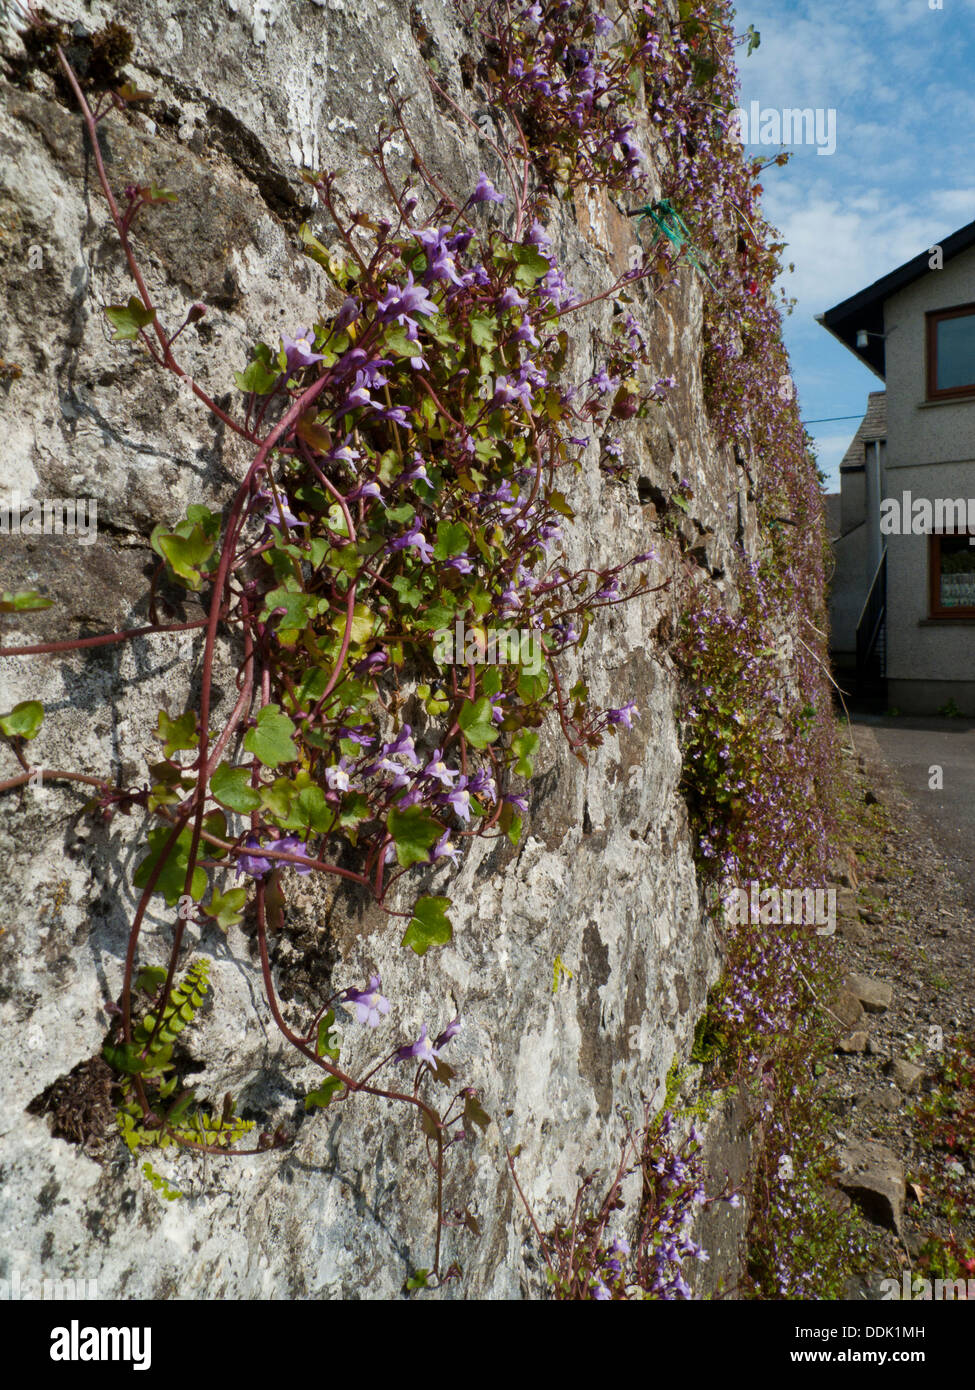 Ivy-leaved Toadflax (Cymbalaria muralis) flowering, growing on an old stone wall. Carmarthen, Wales. May. Stock Photo